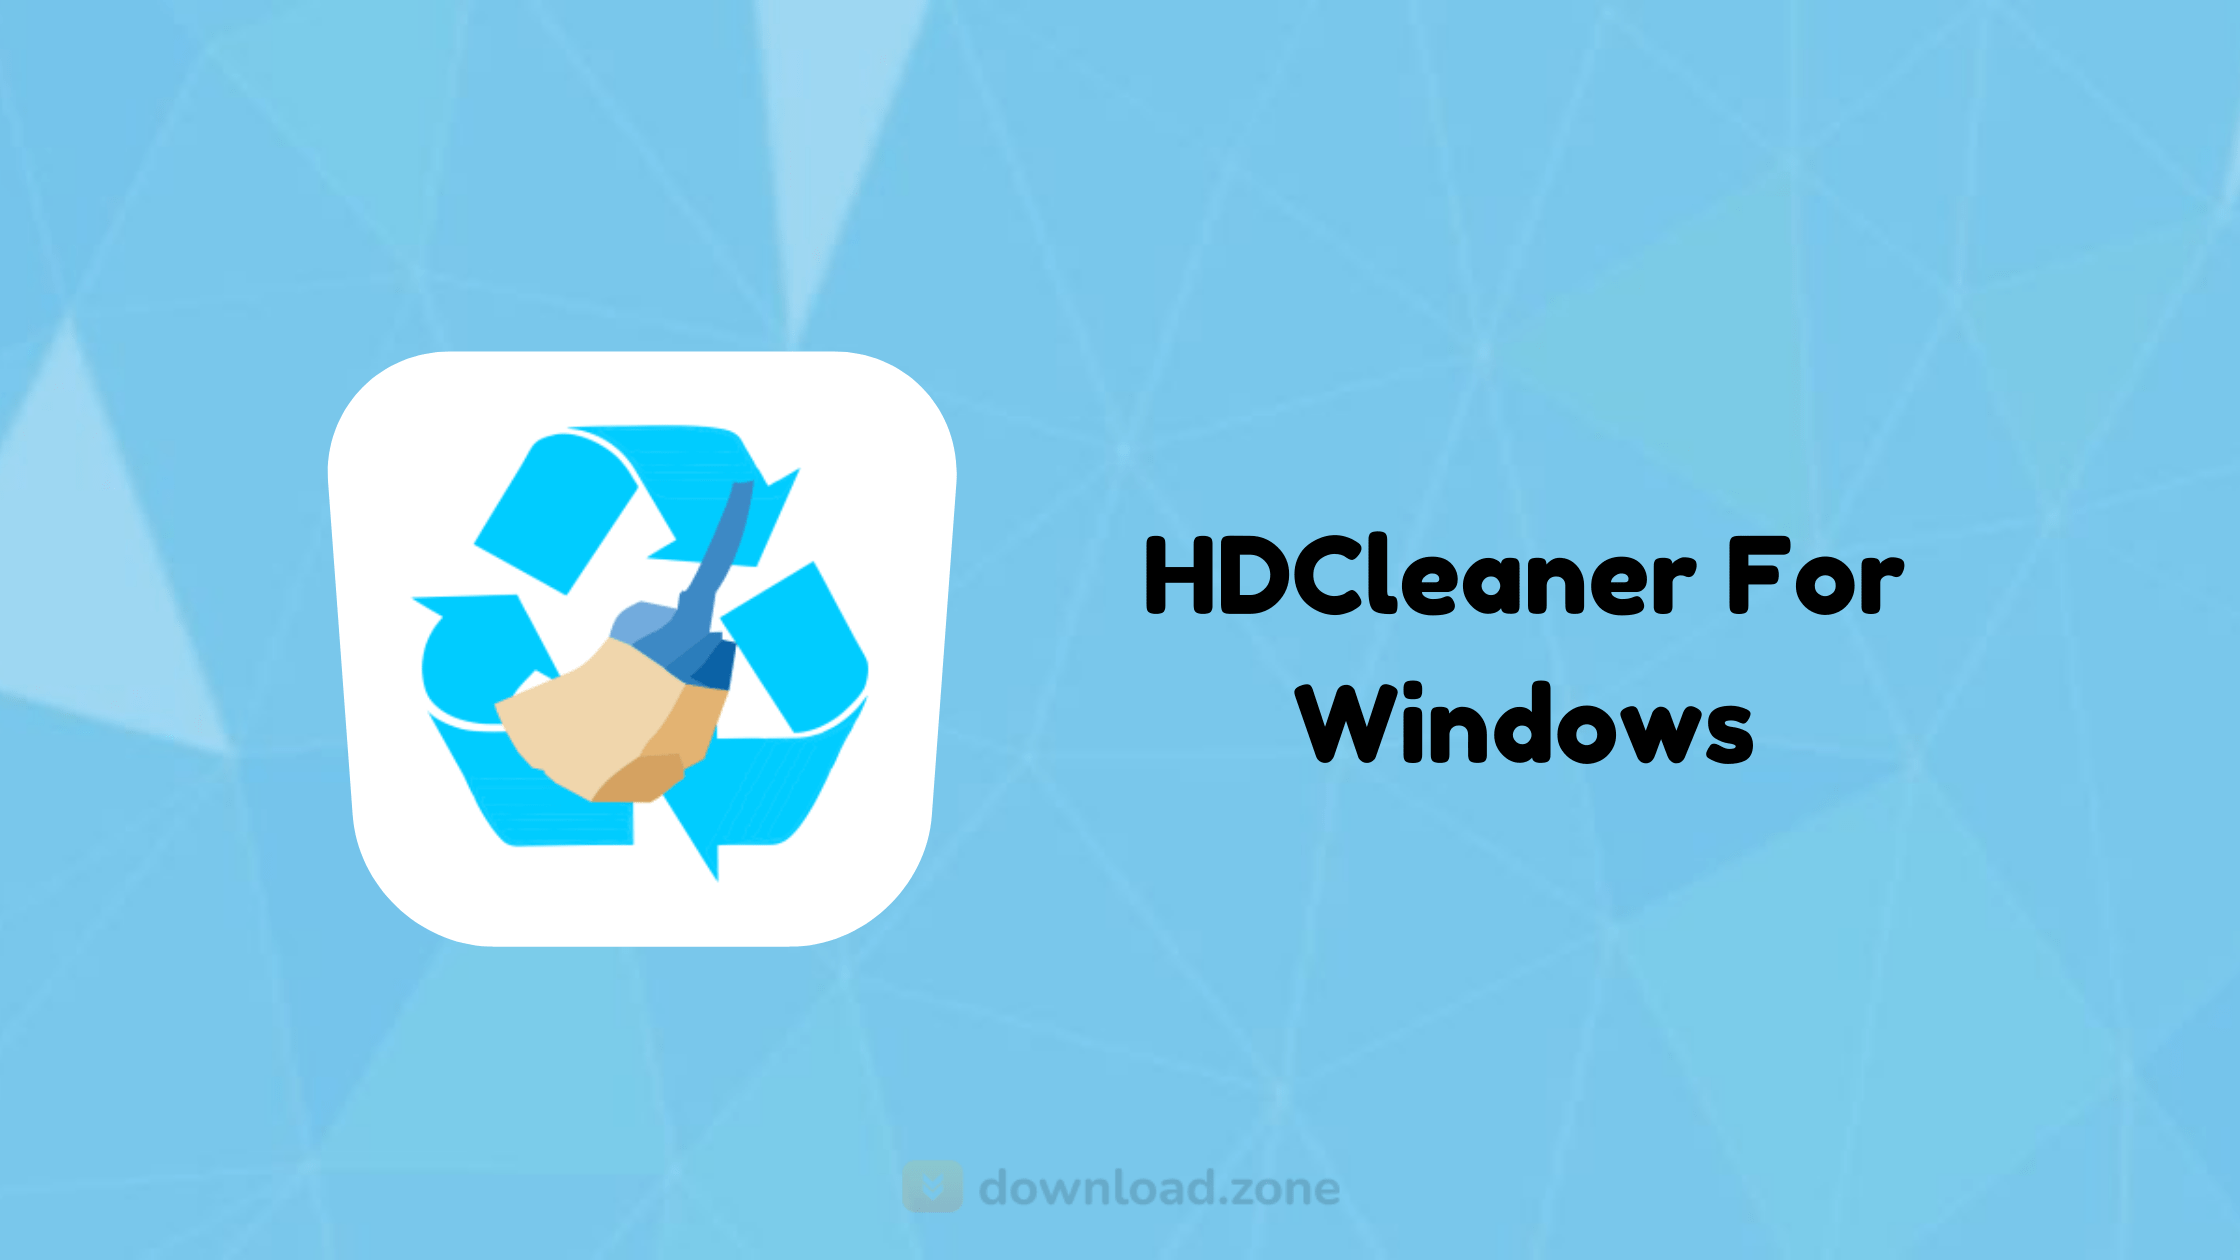 download the new version for windows HDCleaner 2.060